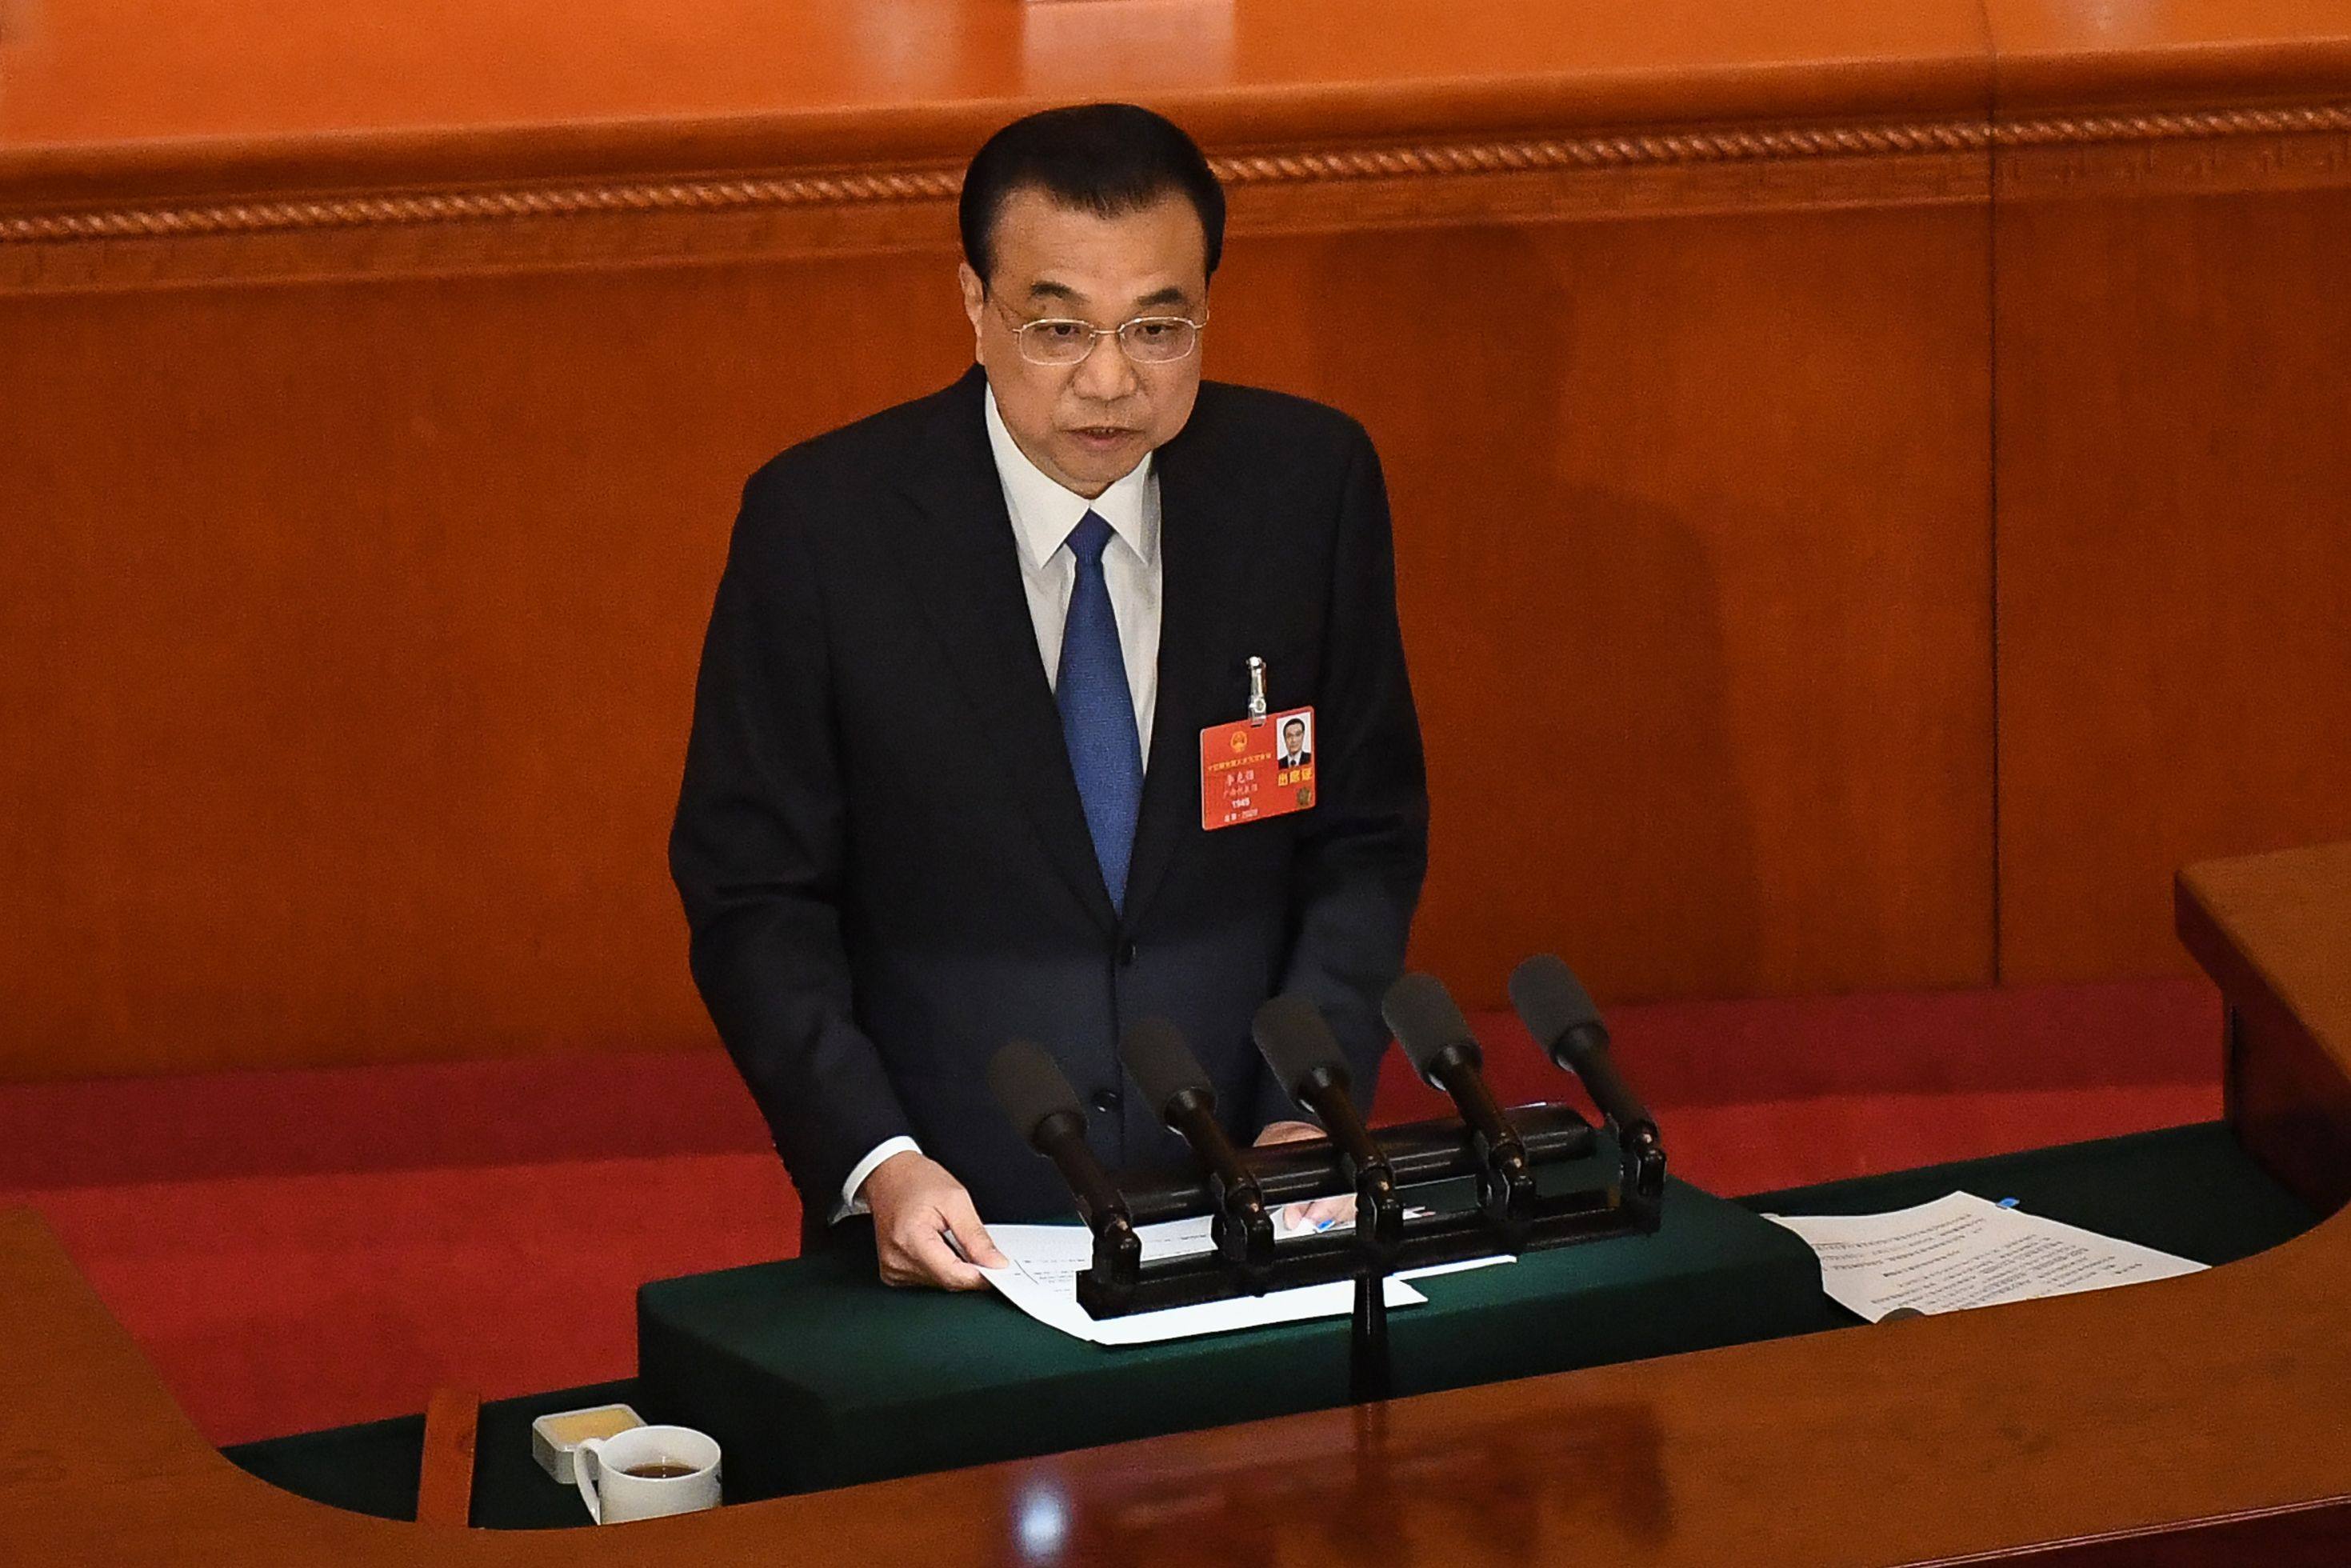 Chinese Premier Li Keqiang delivers his work report during the opening session of the National People’s Congress in Beijing on May 22, 2020. The policy dynamics are shifting this year in Beijing. Photo: AFP